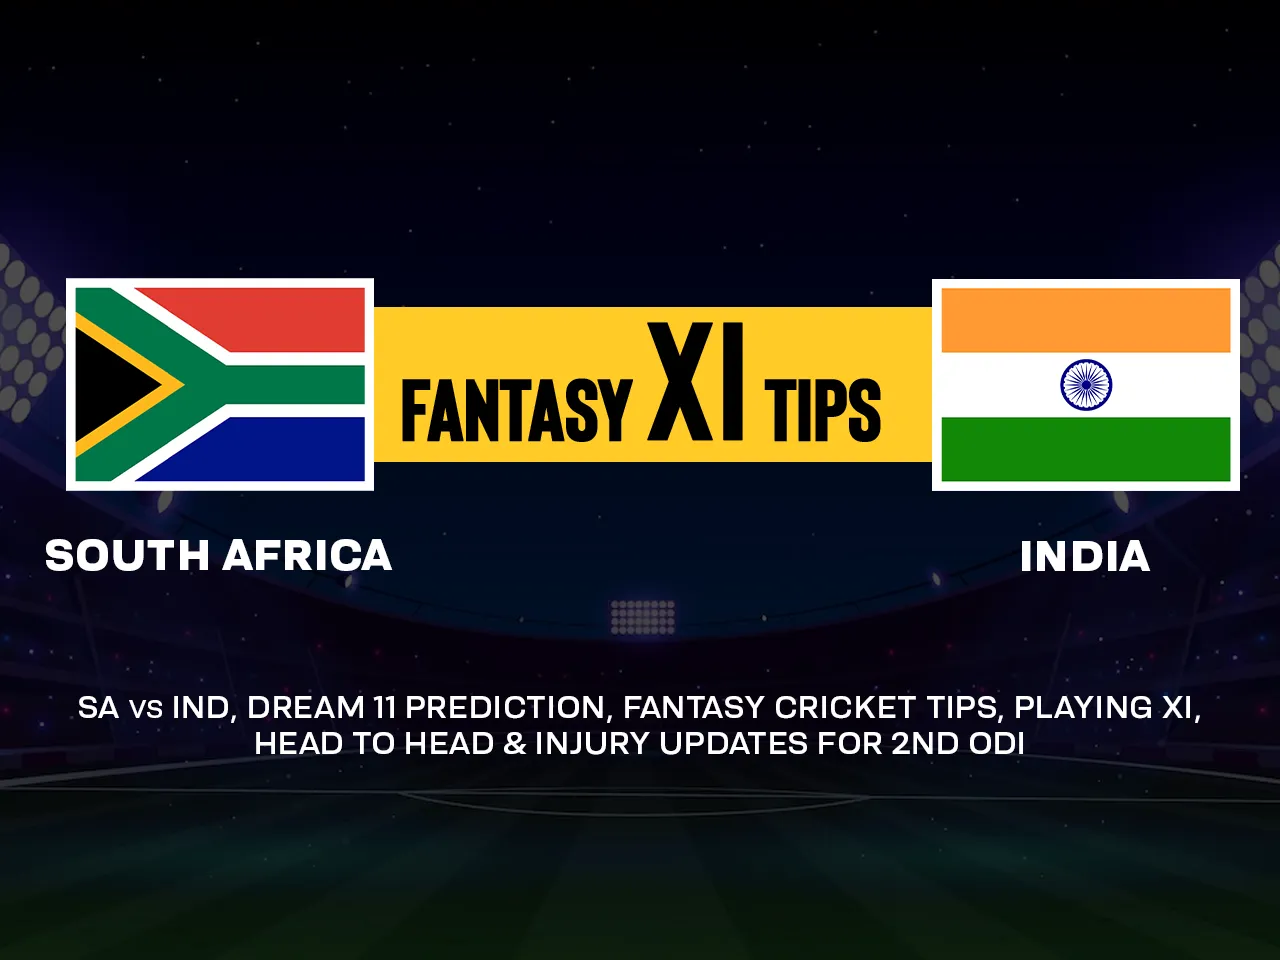 South Africa vs India 2023: SA vs IND Dream11 Prediction, Playing XI Head-to-Head Stats, and Pitch Report for 2nd ODI